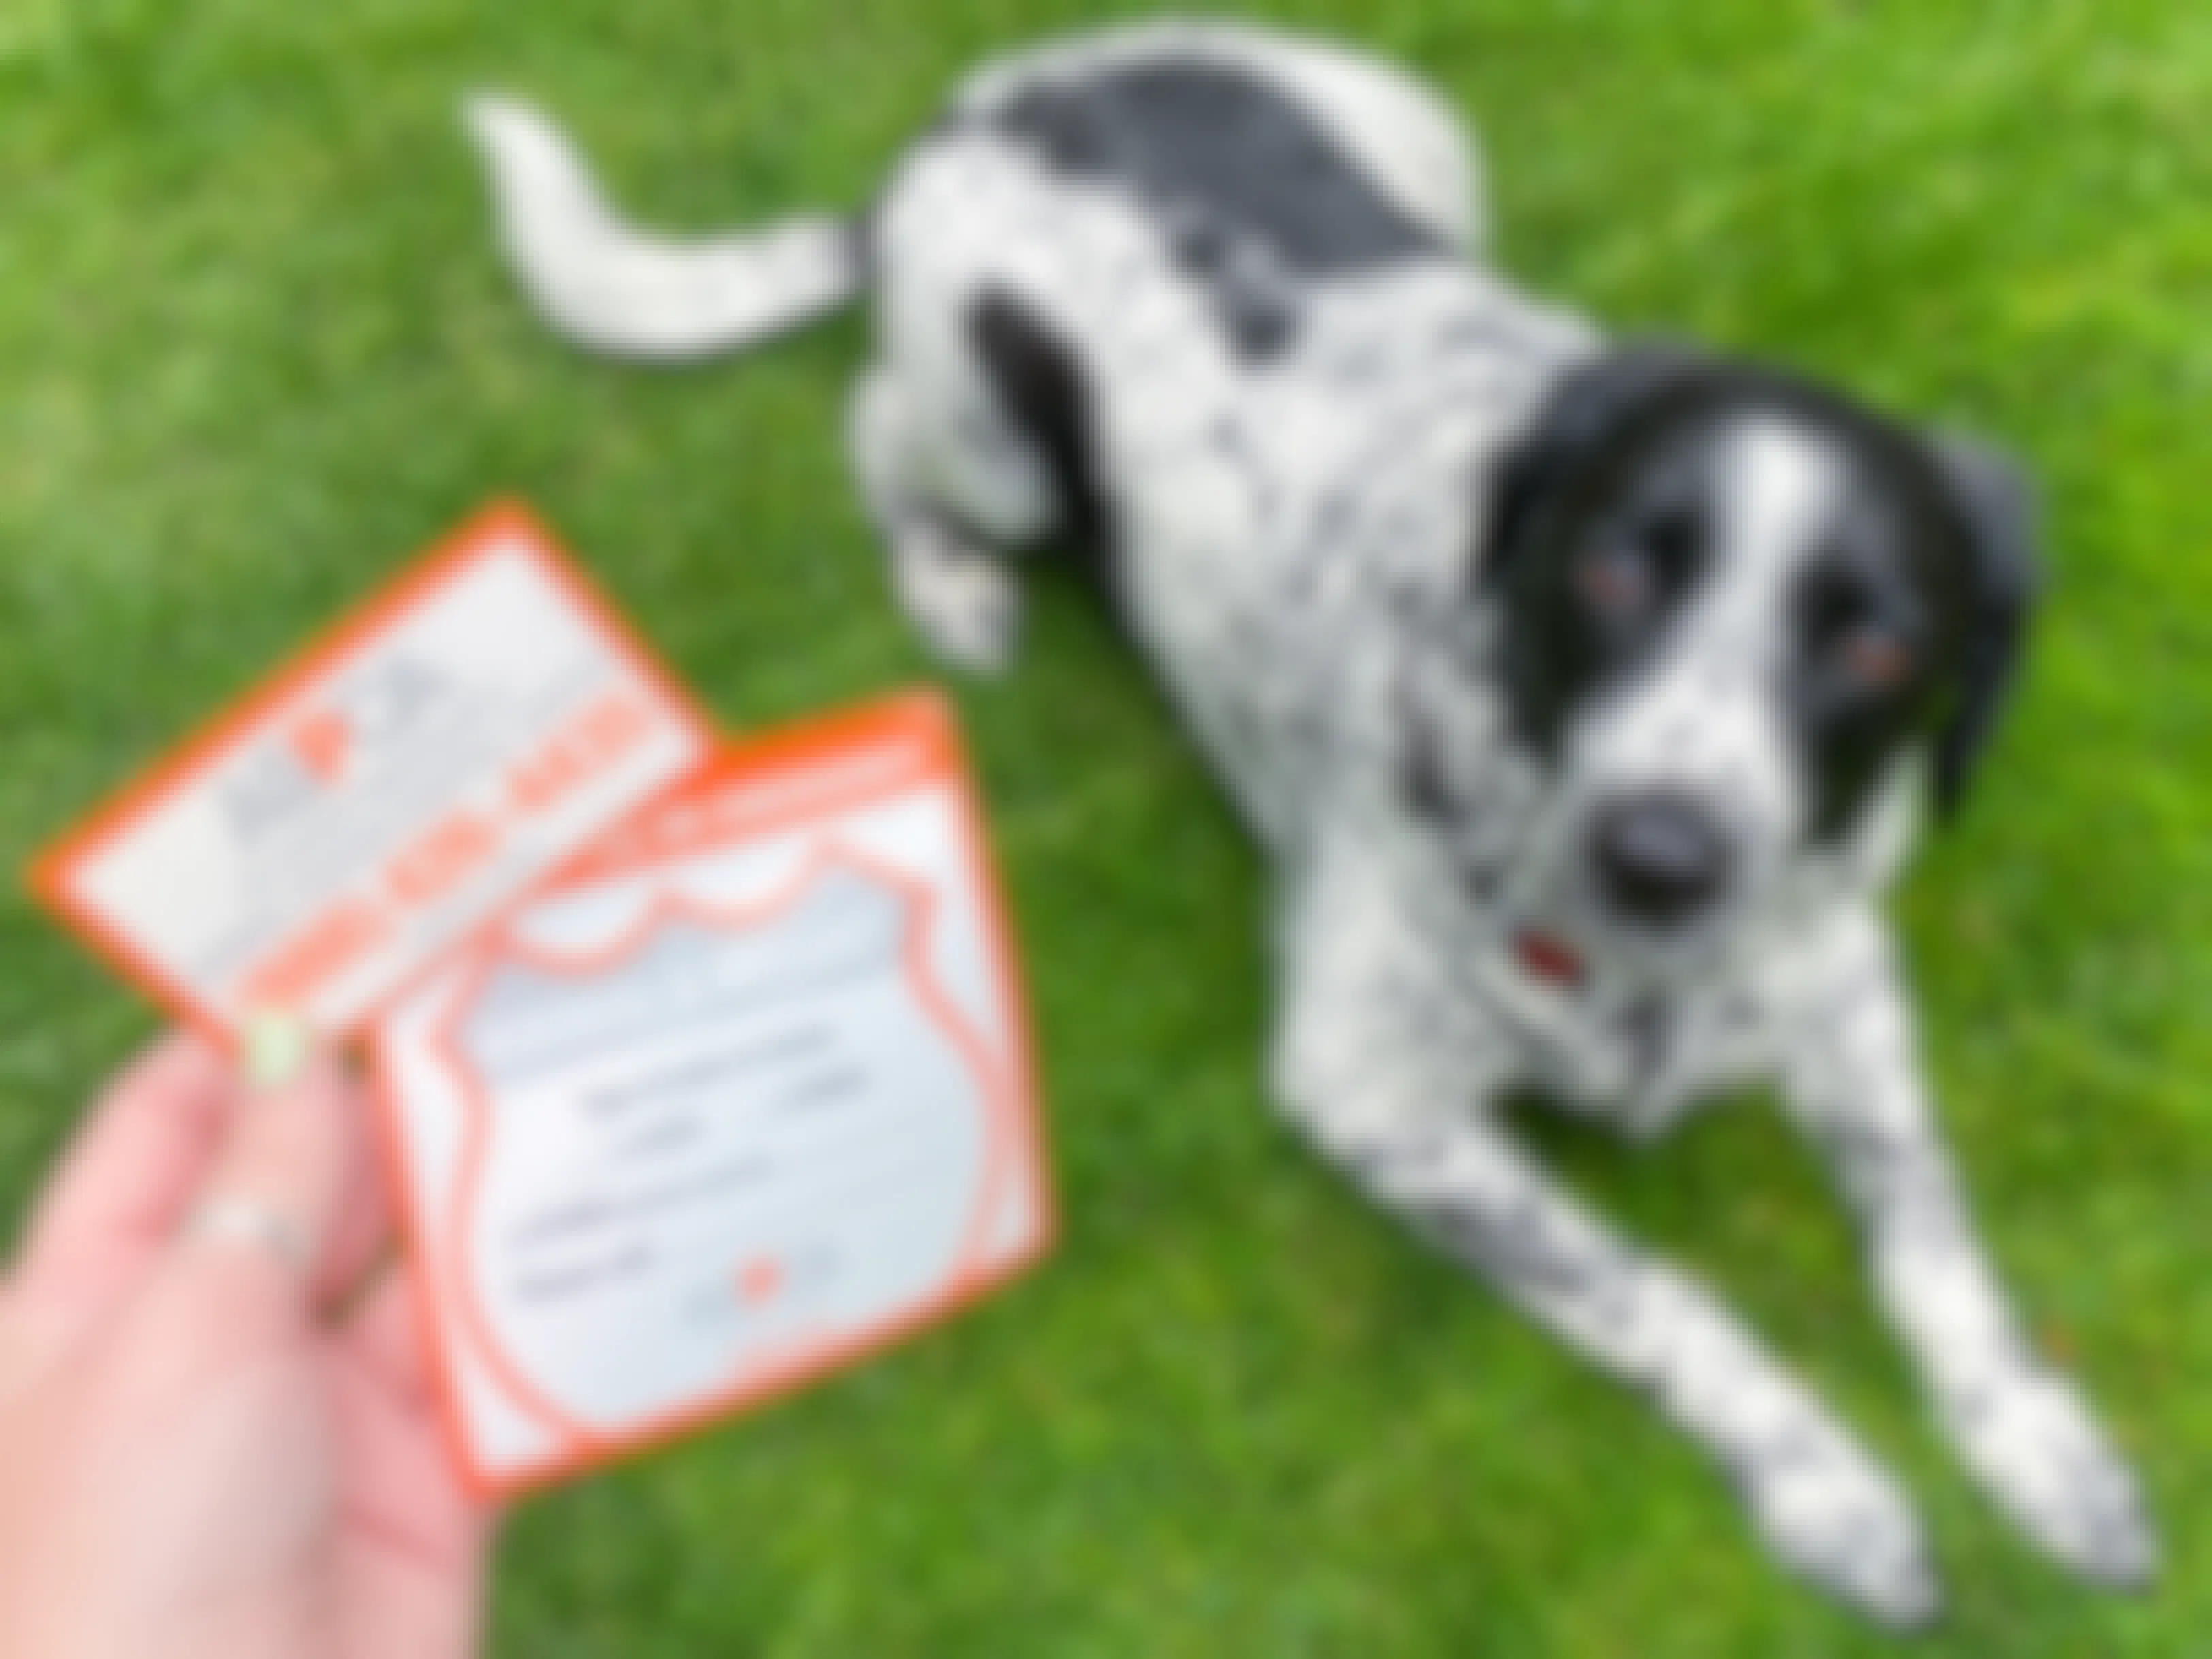 A dog lying on the grass and a person's hand holding an ASPCA magnet and sticker.